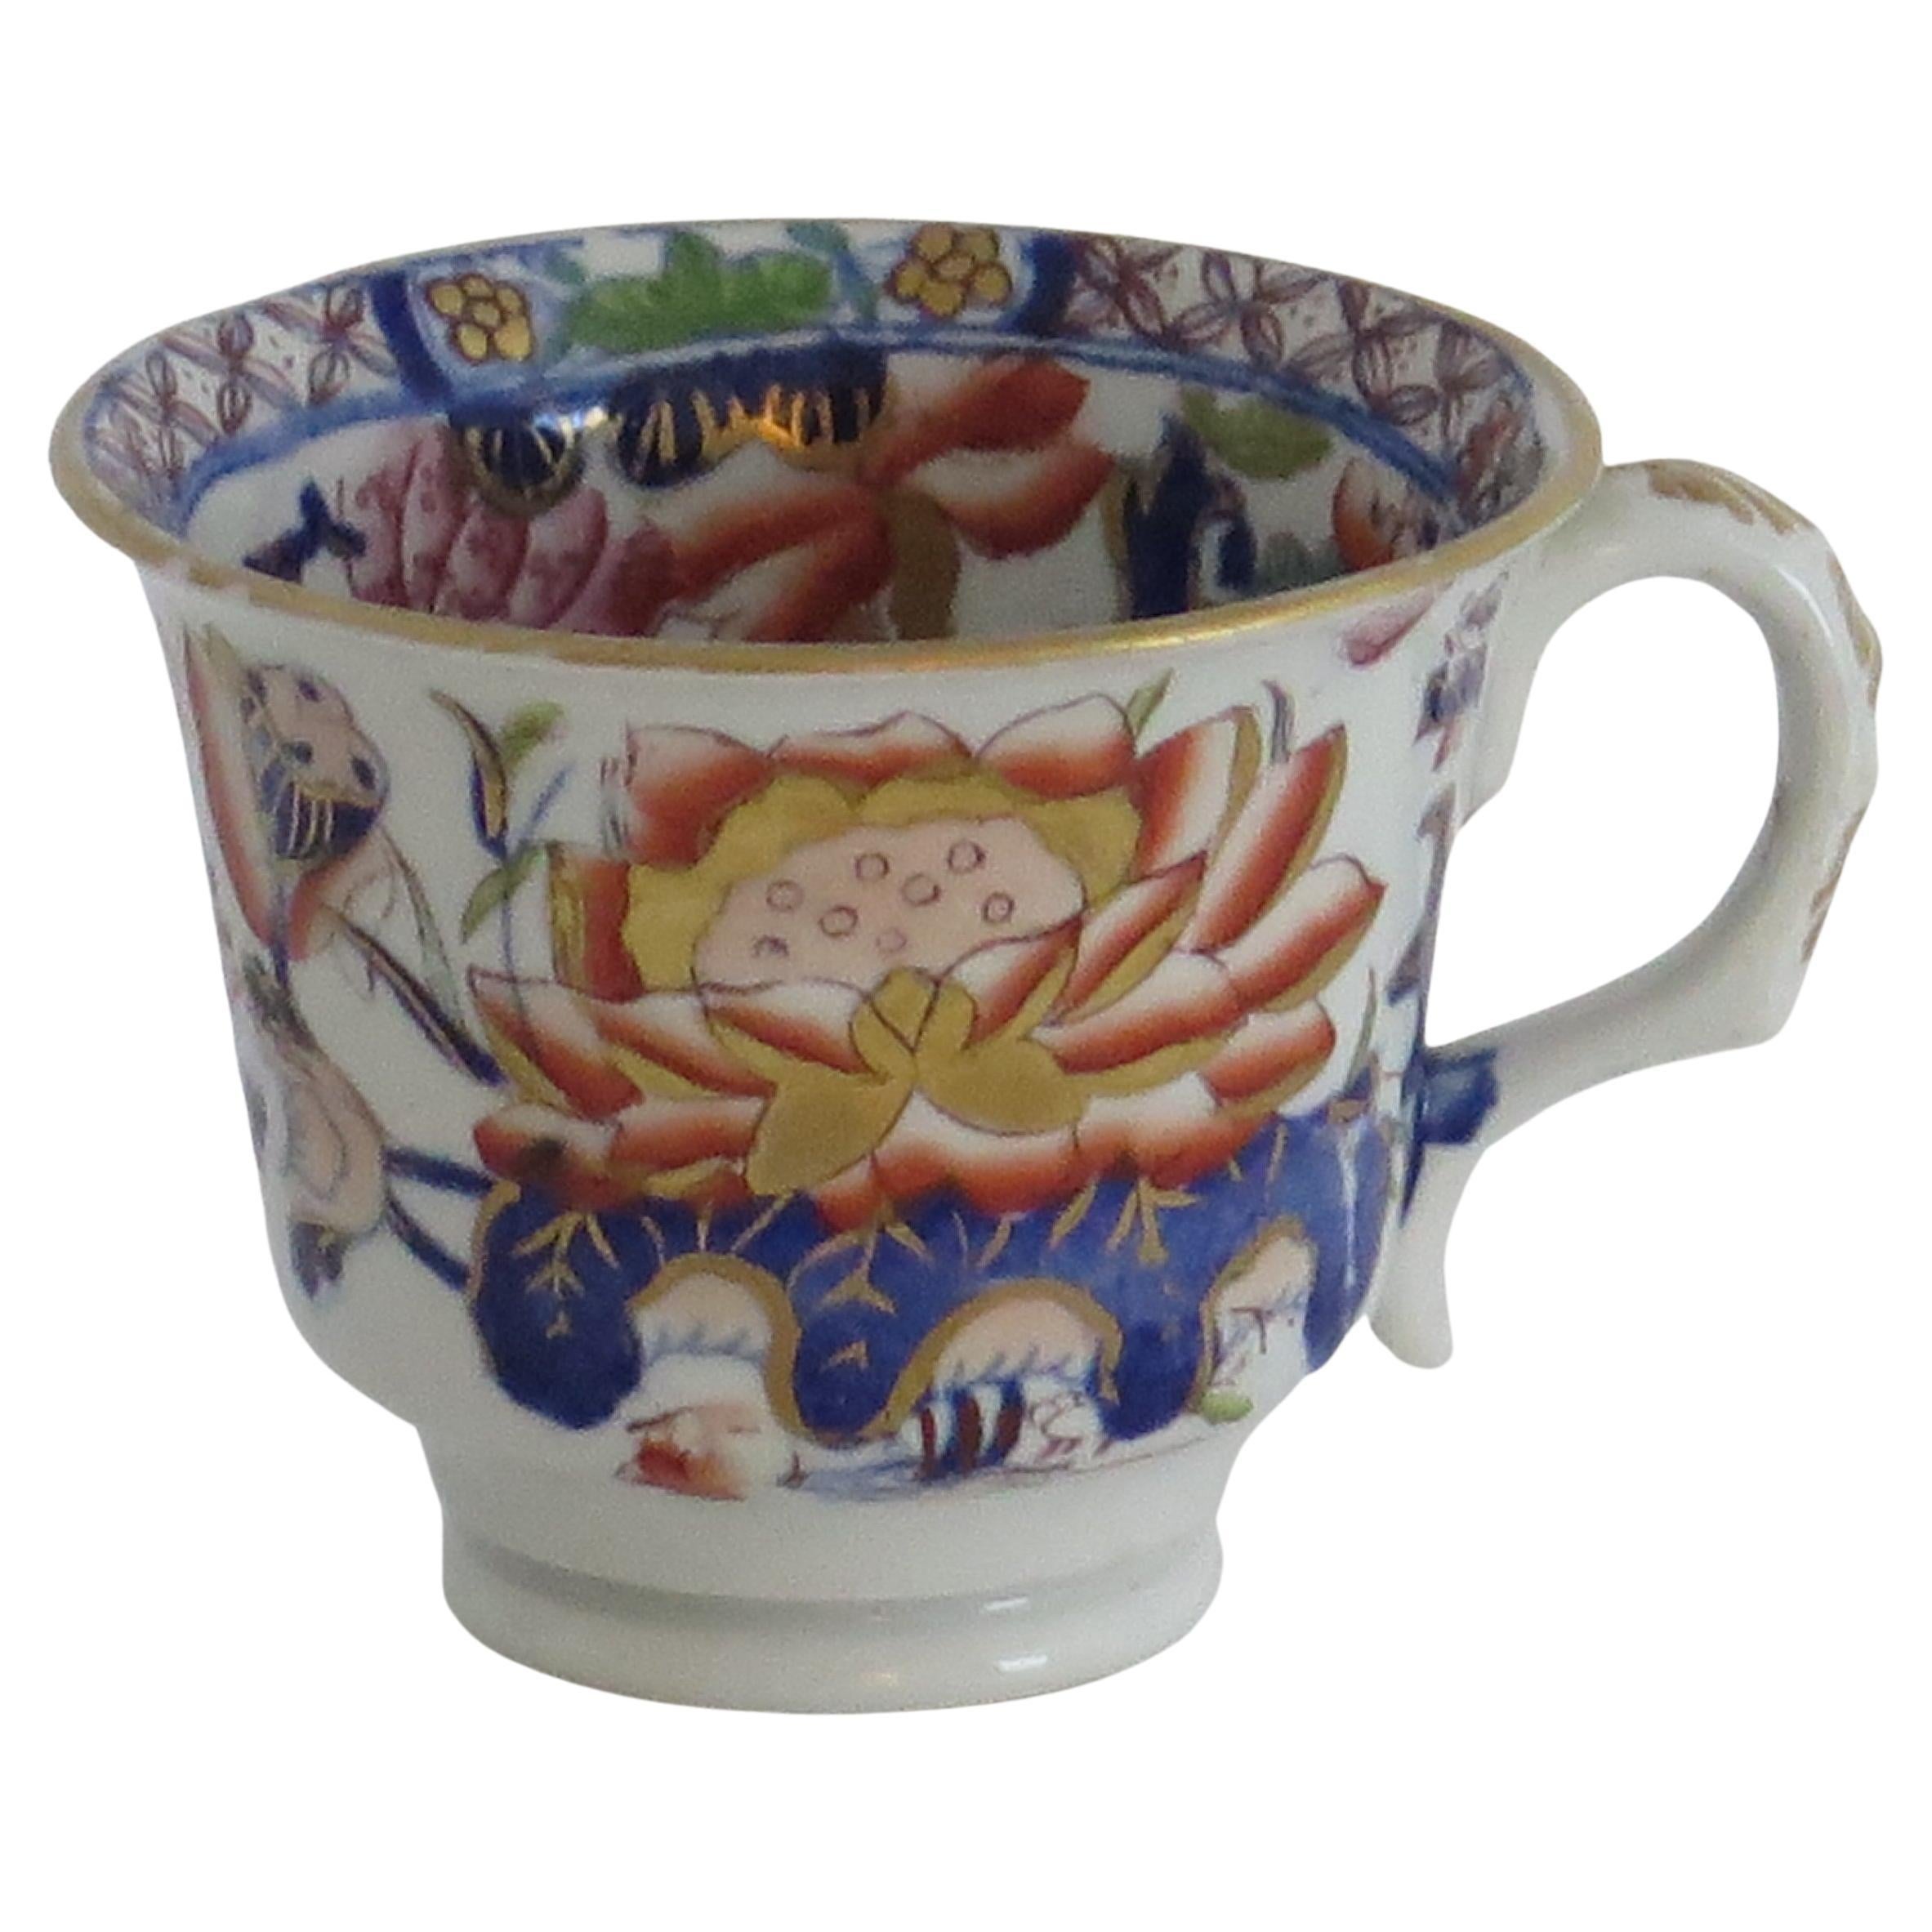 Mason's Ironstone Tea Cup Hand Painted in Gilded Water Lily Pattern, circa 1835